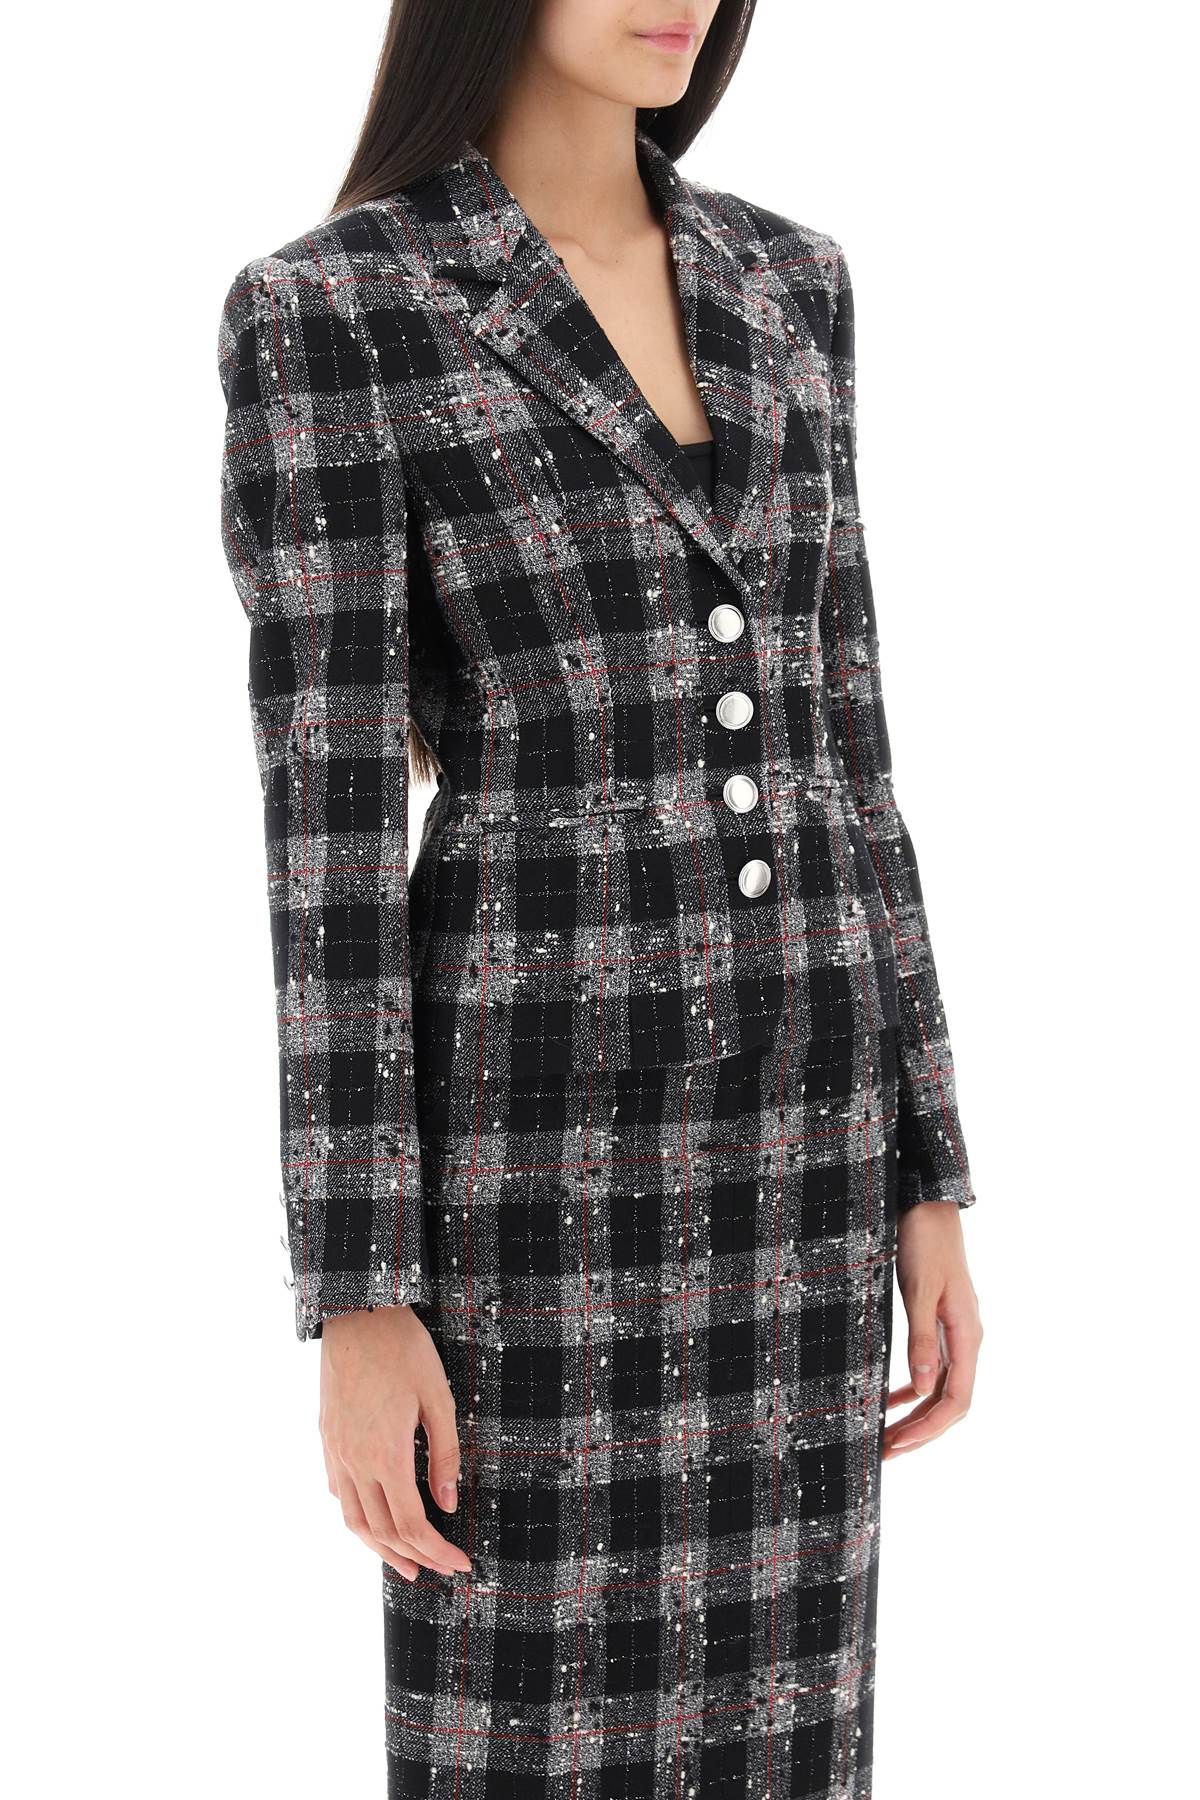 Alessandra rich single-breasted jacket in boucle' fabric with check motif-women > clothing > jackets > casual jackets-Alessandra Rich-42-Black-Urbanheer